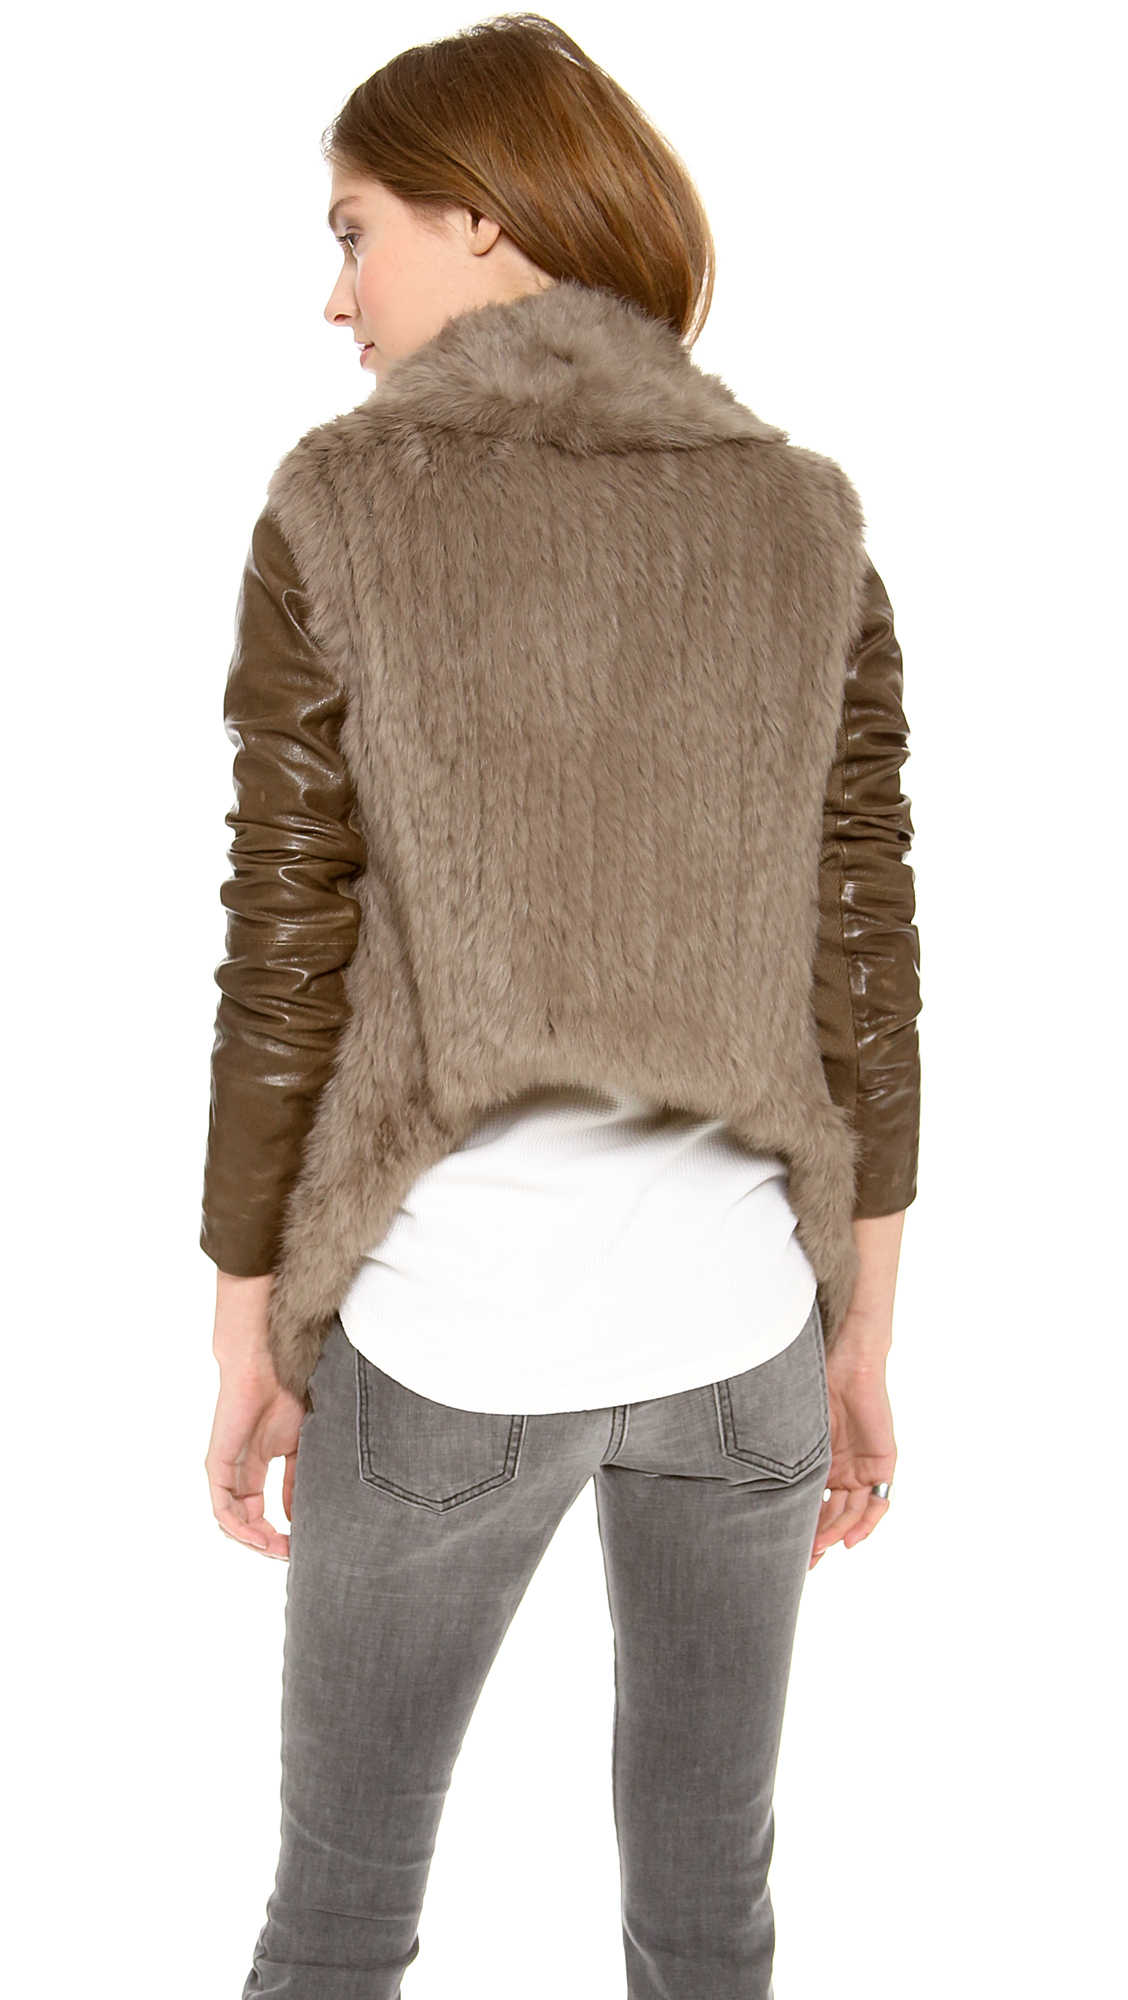 June Knit Fur Jacket with Leather Sleeves in Walnut (Brown) - Lyst